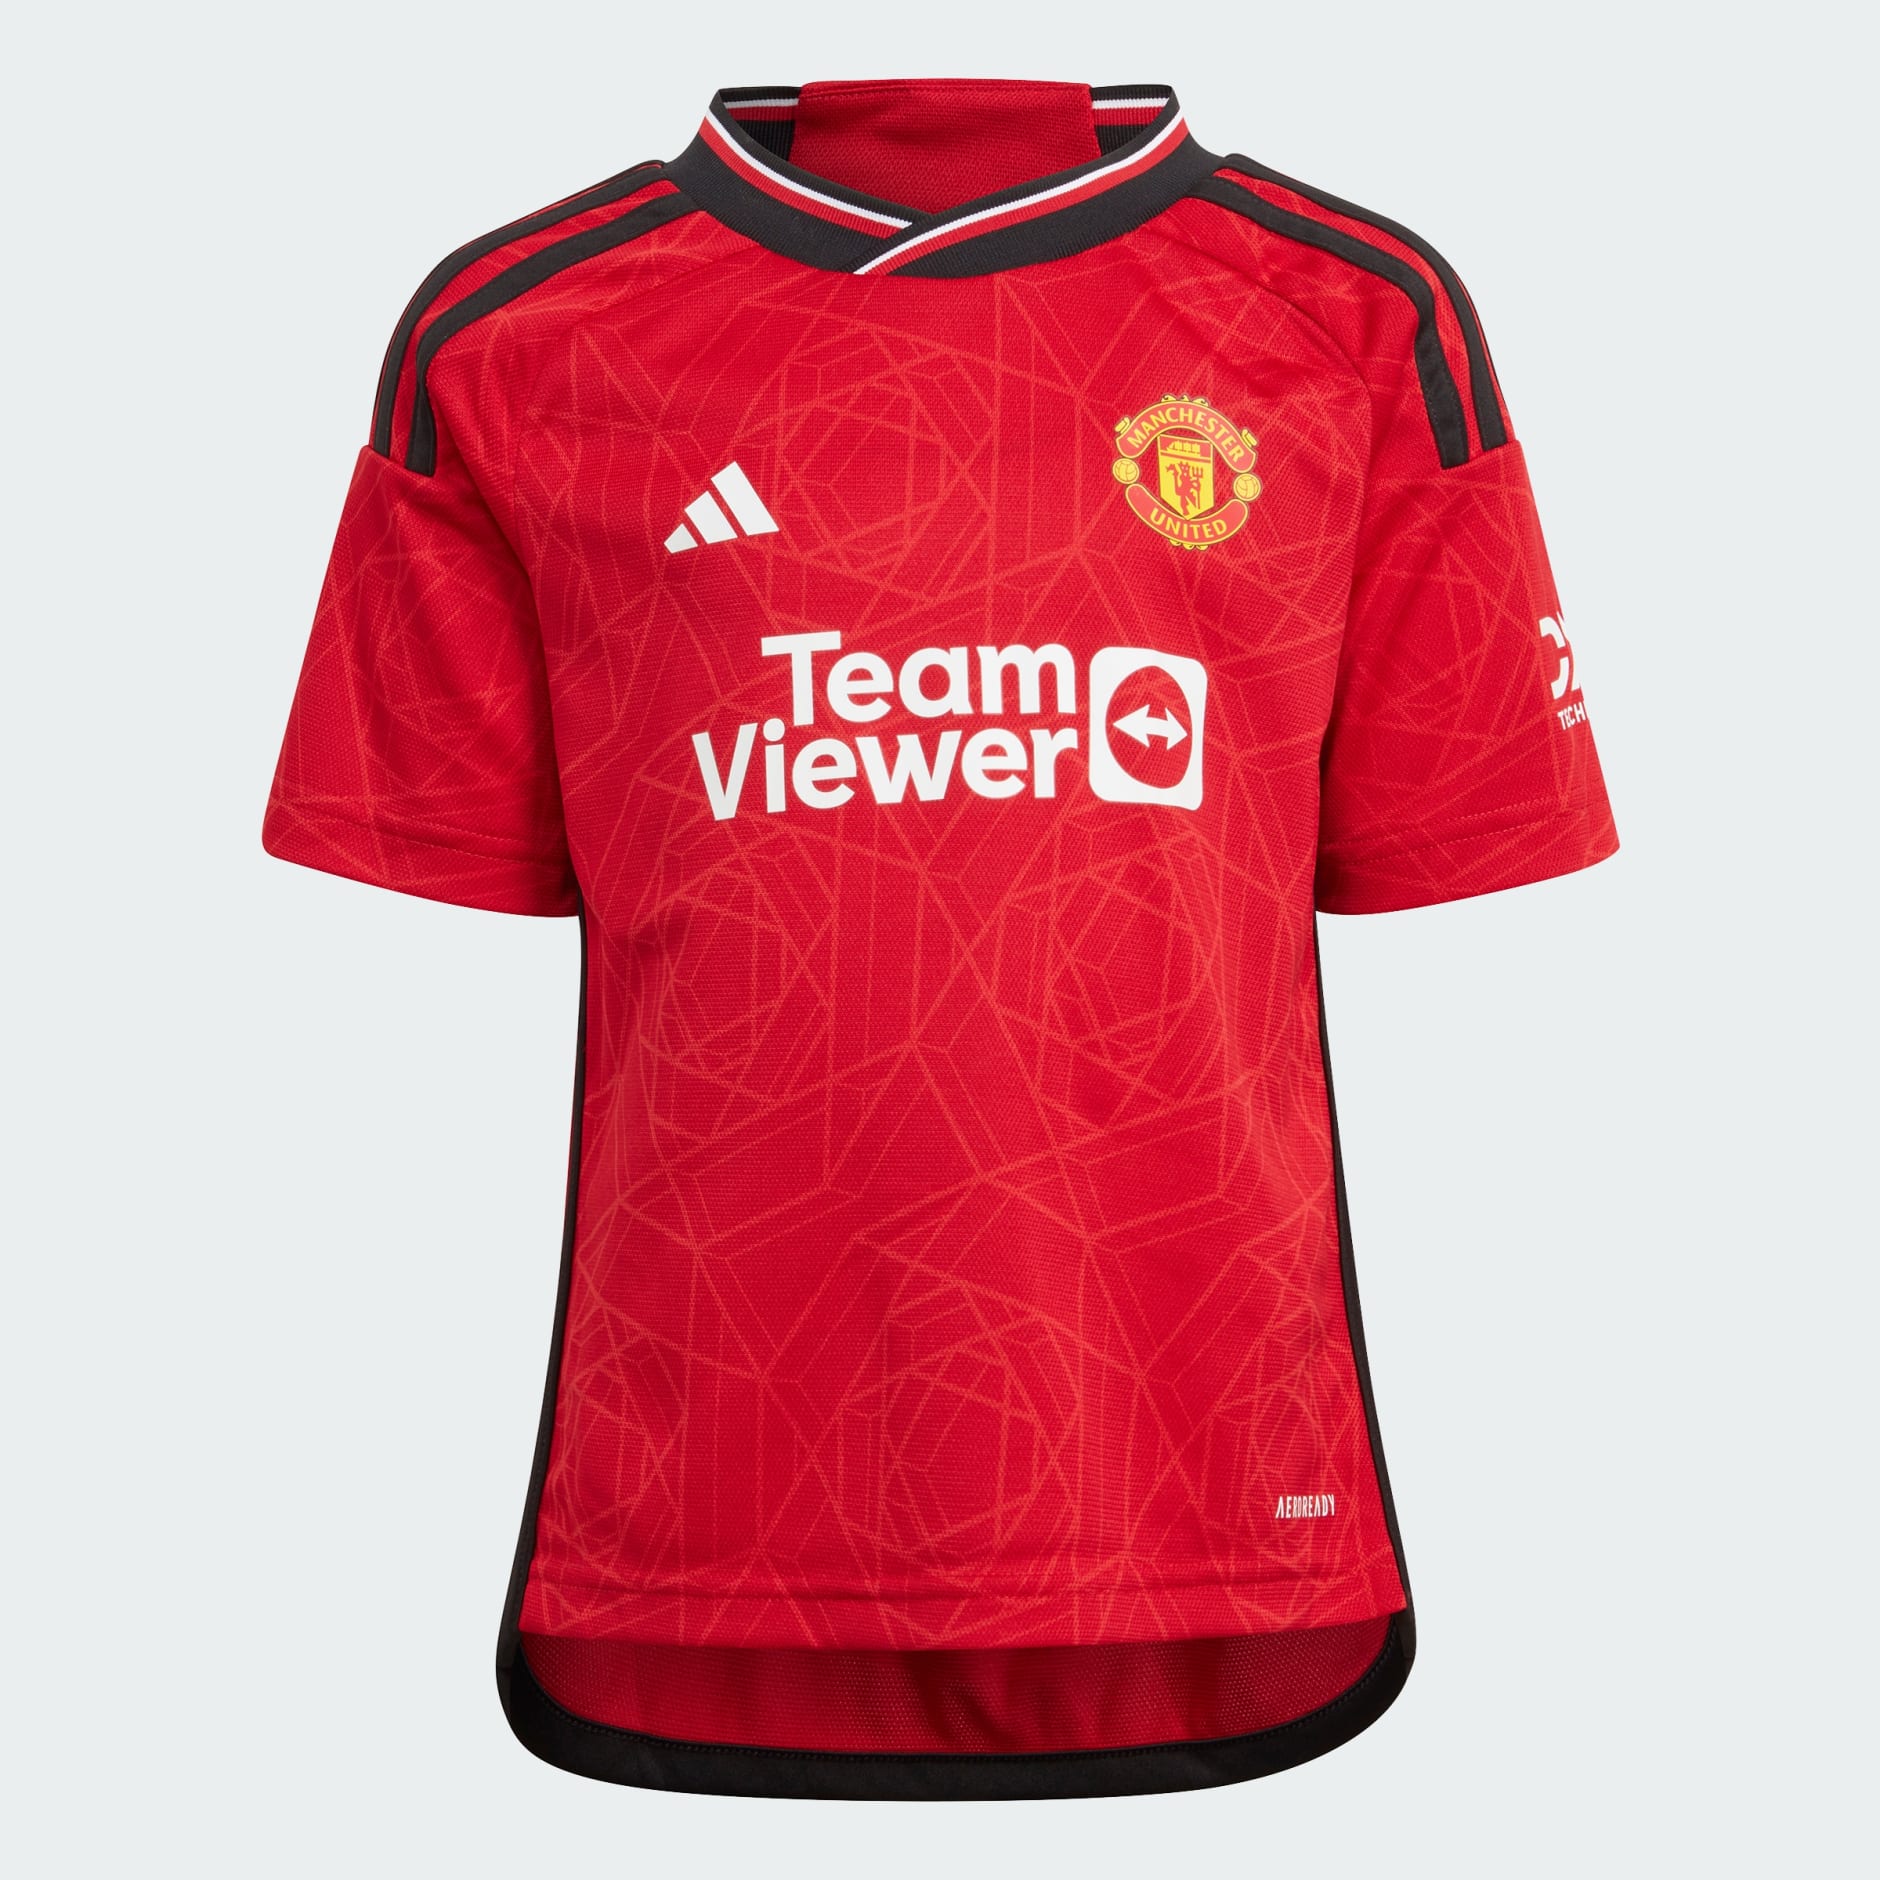 Clothing - Manchester United 23/24 Home Mini Kit - Red | adidas South ...